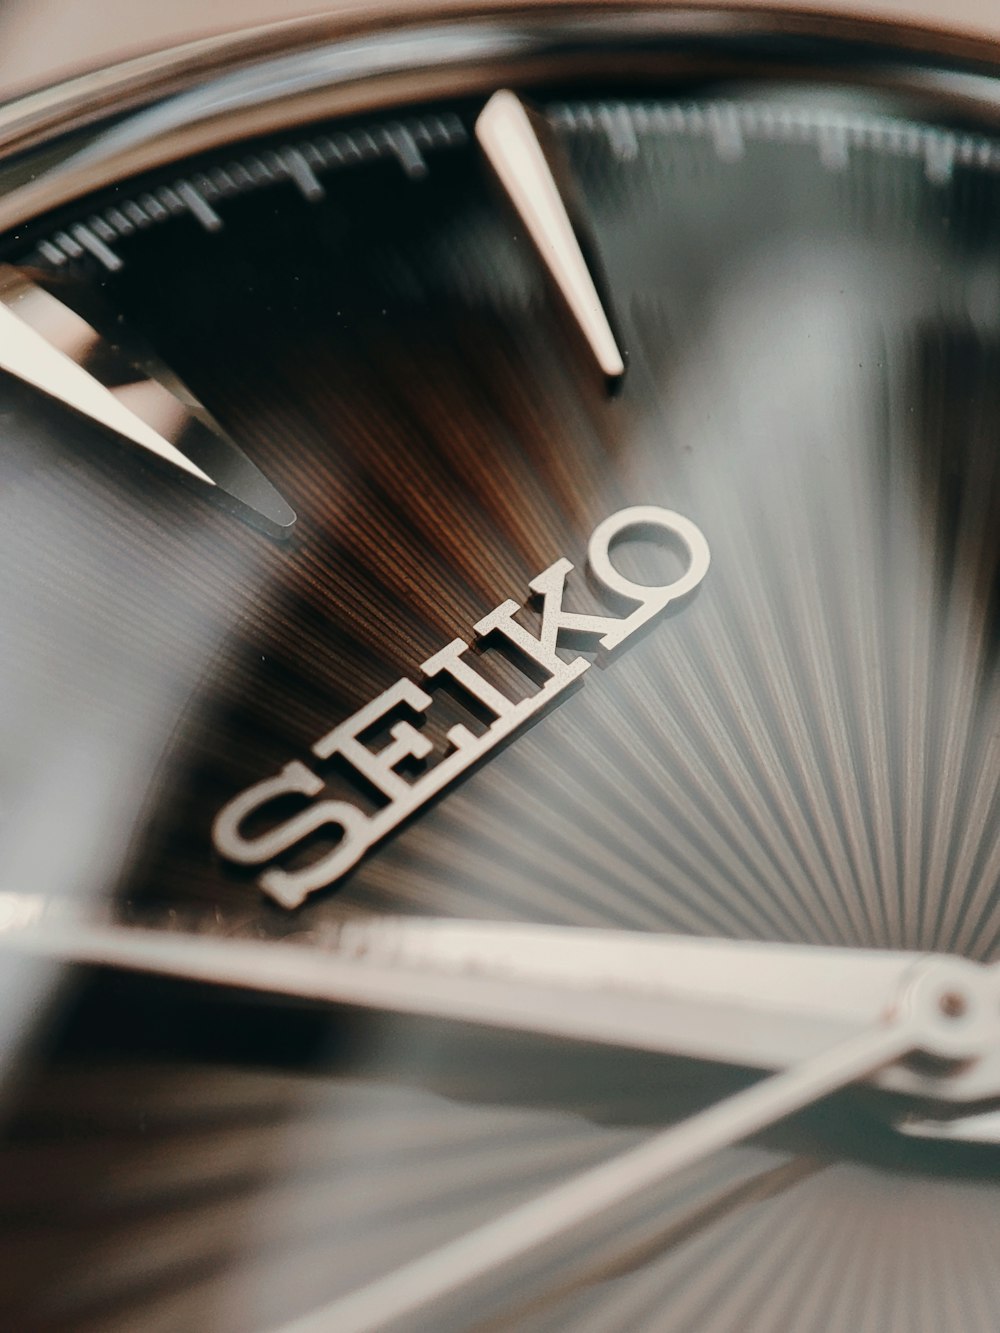 a close up of a clock with the word seiko on it